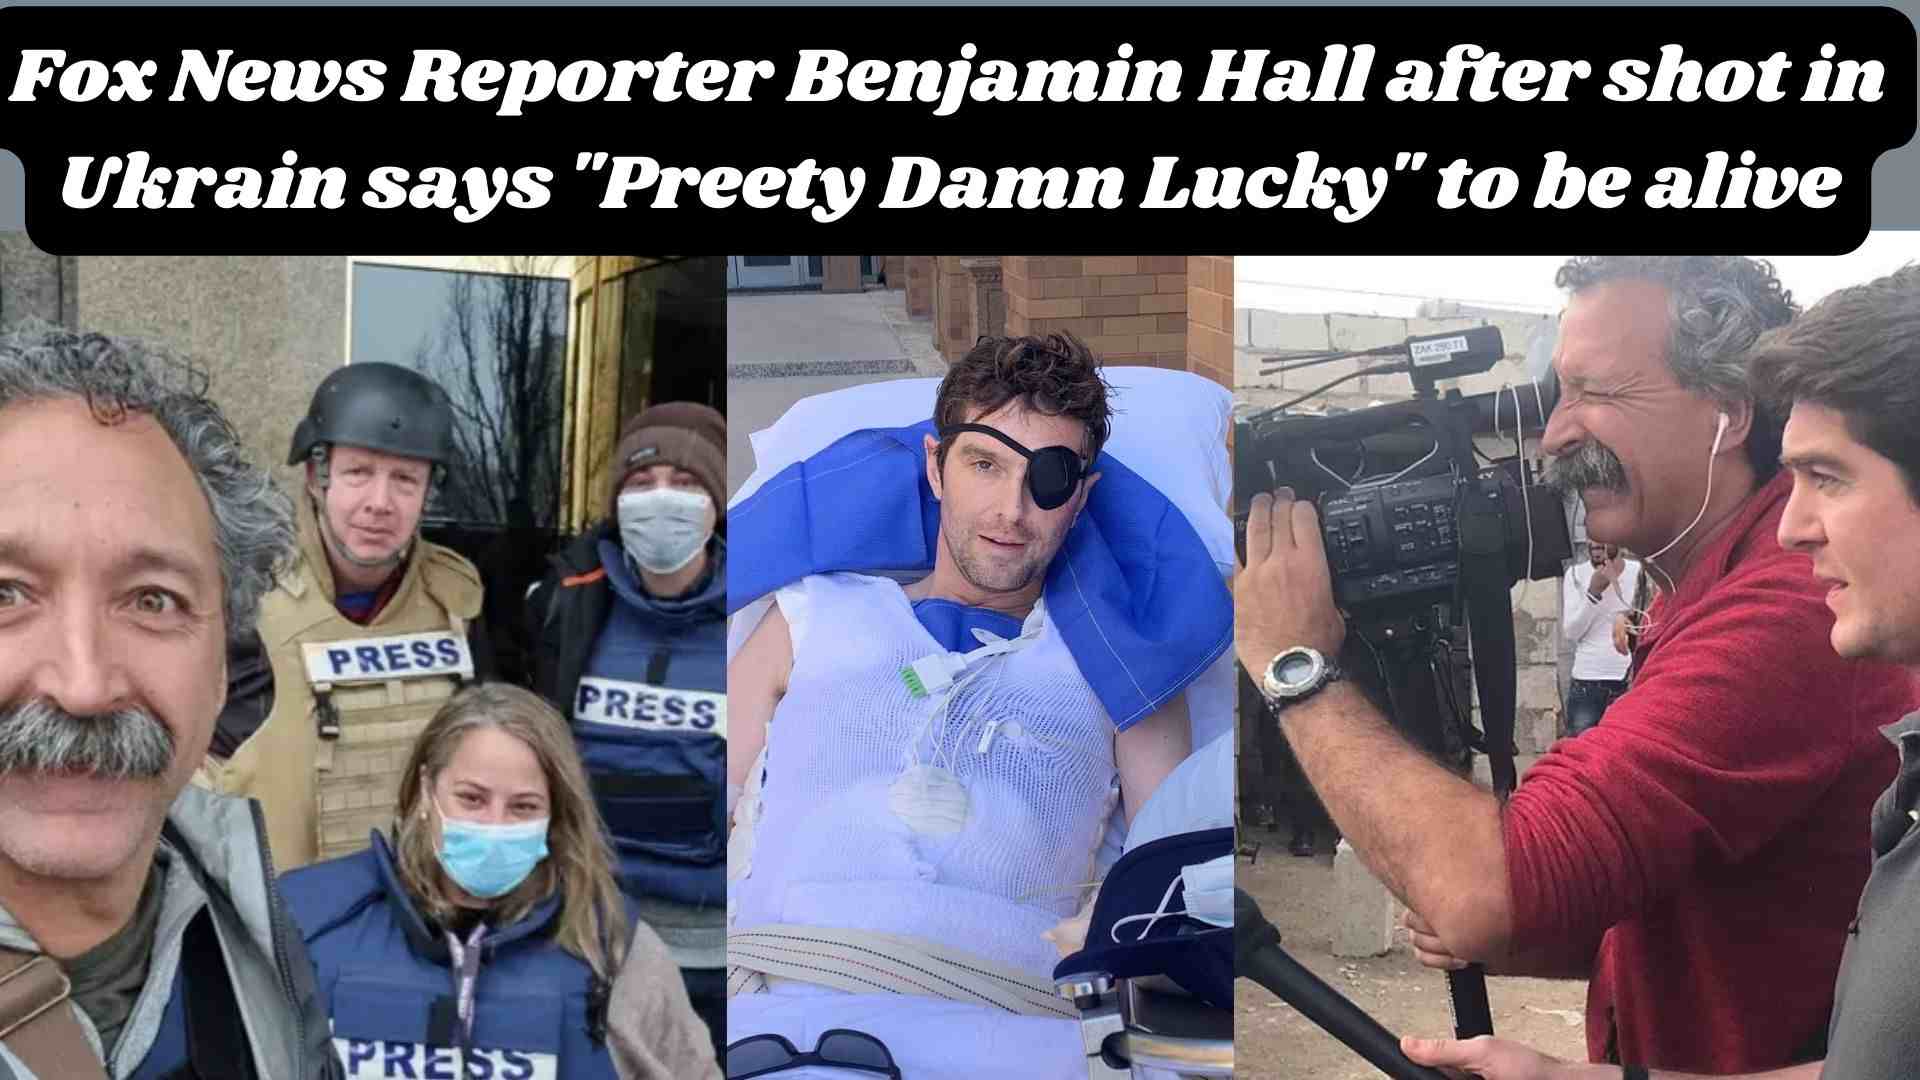 Fox News Reporter Benjamin Hall after shot in Ukrain says "Preety Damn Lucky" to be alive Wallpaper and images